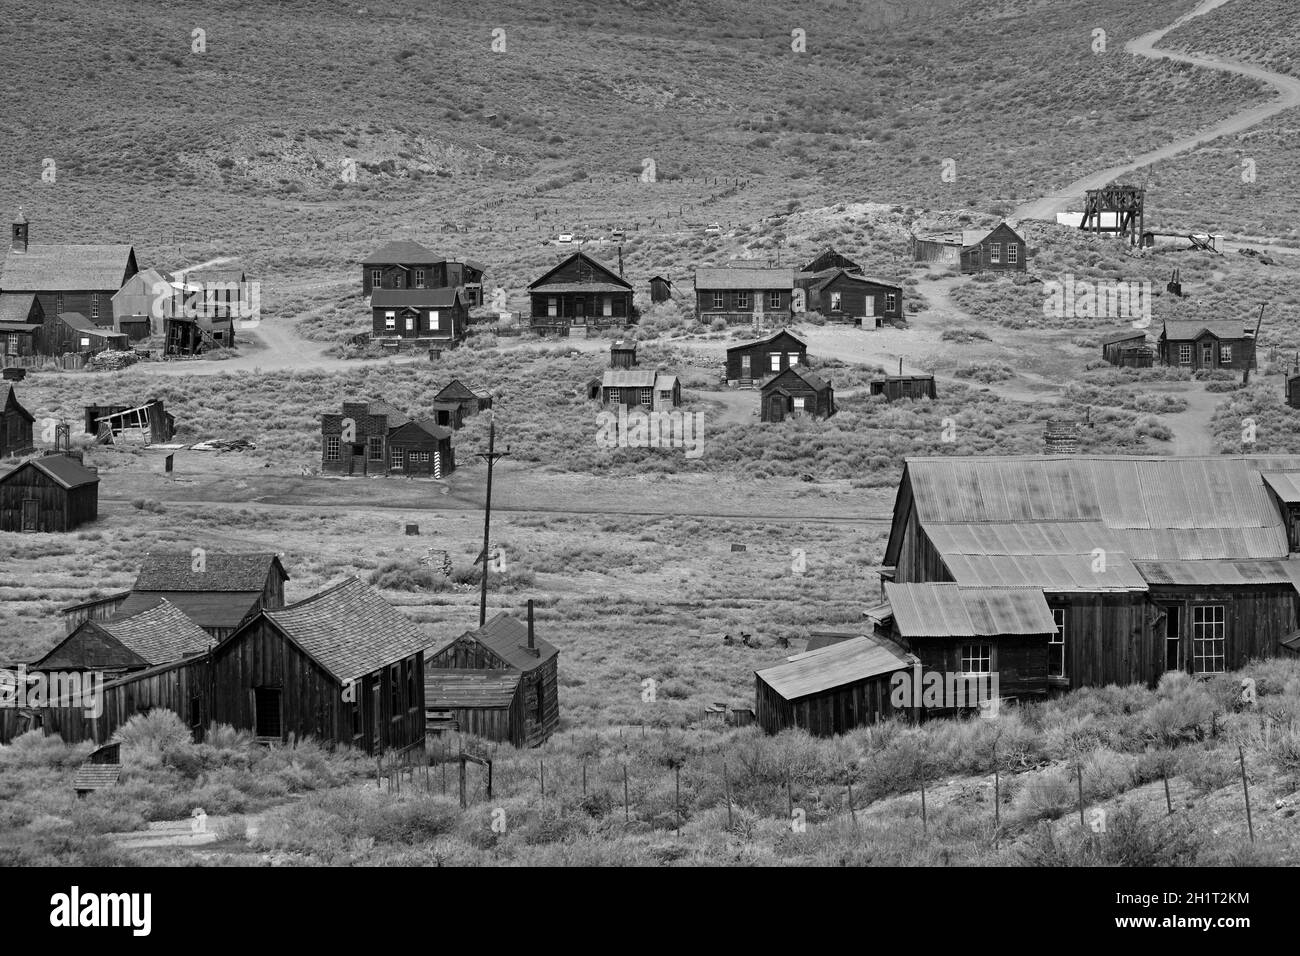 Bodie Ghost Town ( elevation 8379 ft / 2554 m ), Bodie Hills, Mono County, Eastern Sierra, California, USA Stock Photo